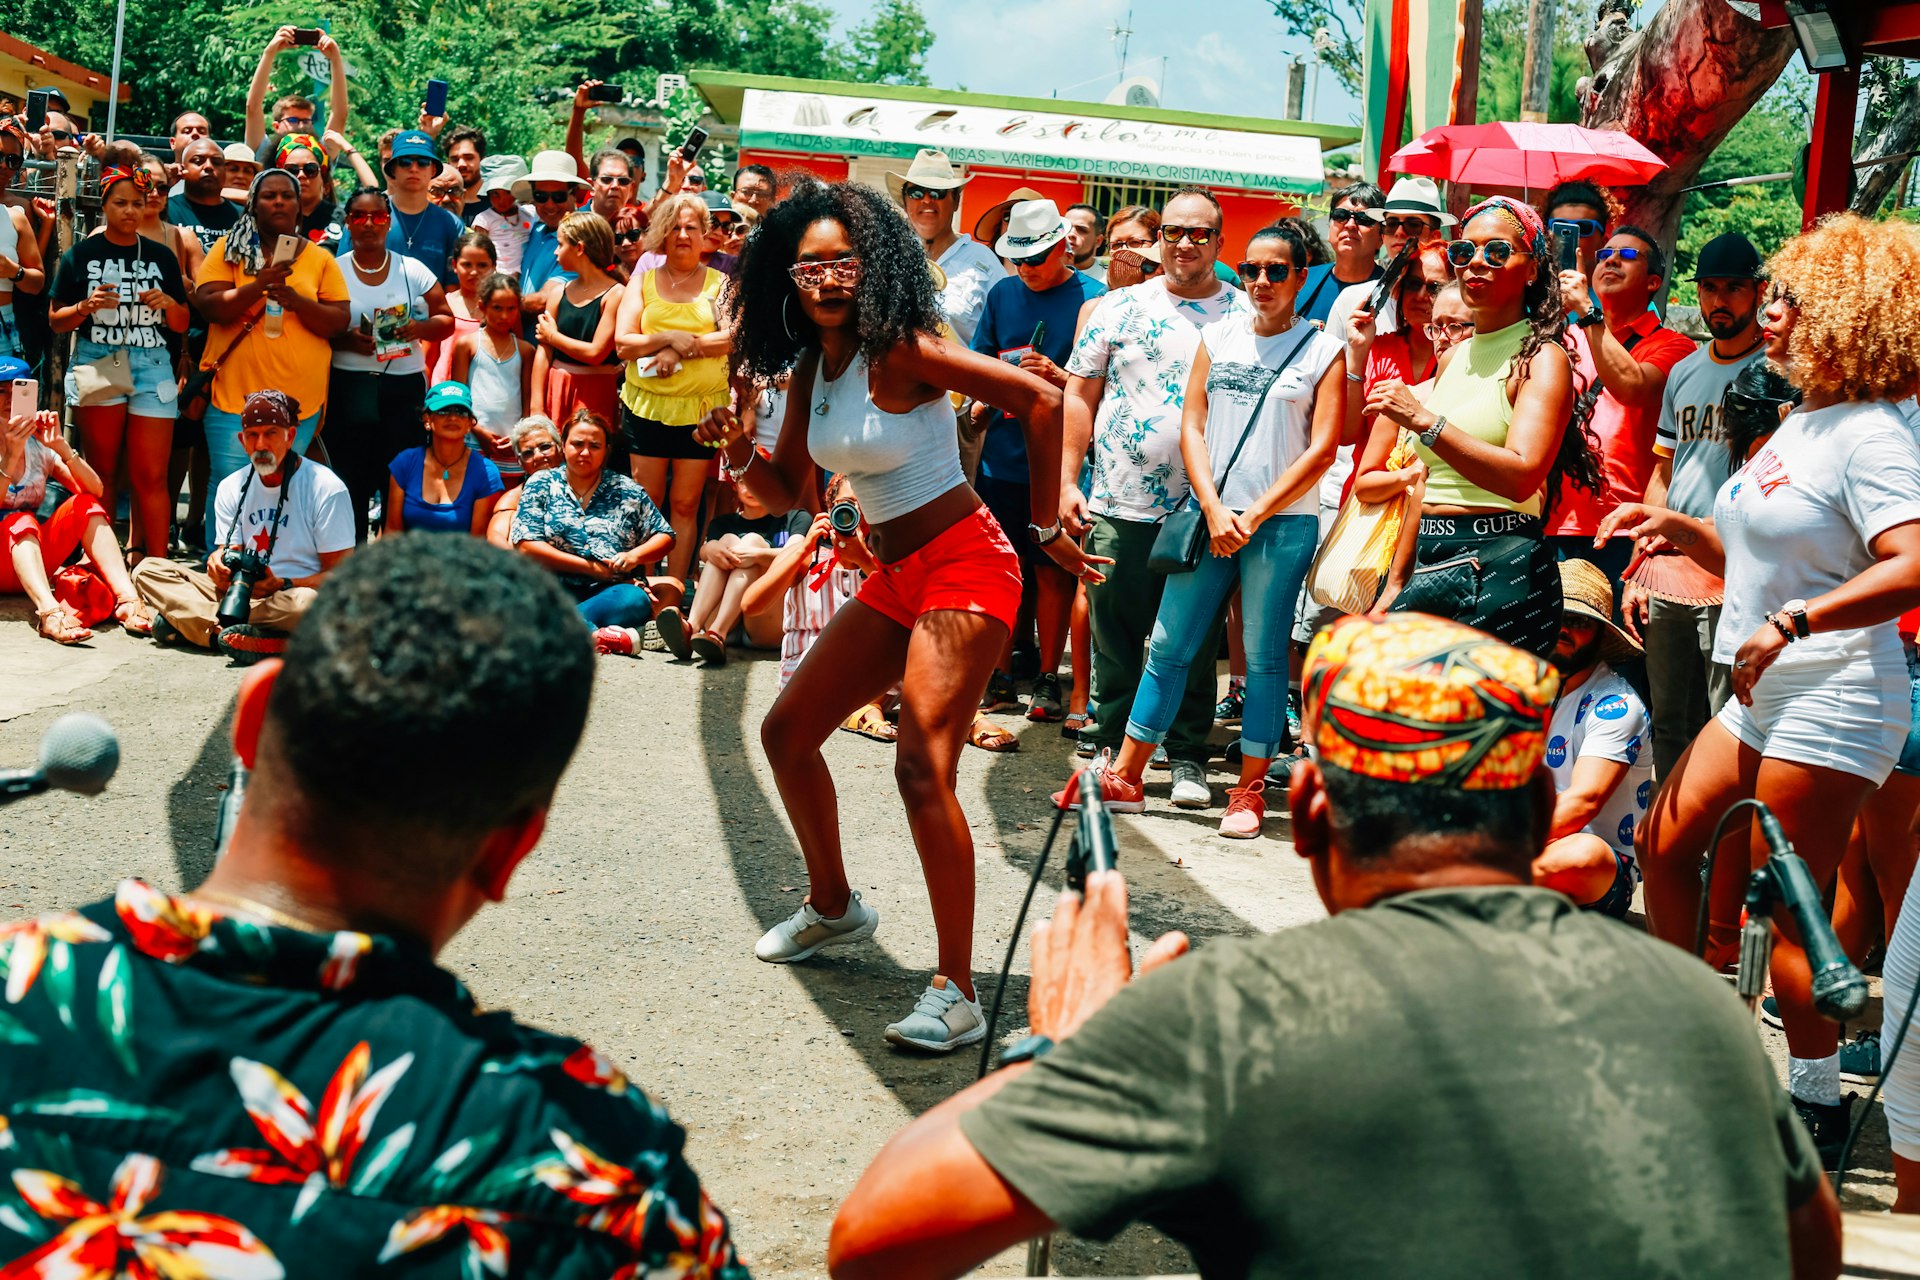 A woman wearing red shorts and a white crop top dances in the center of a circle as a group of musicians play the drums and other folks watch. 